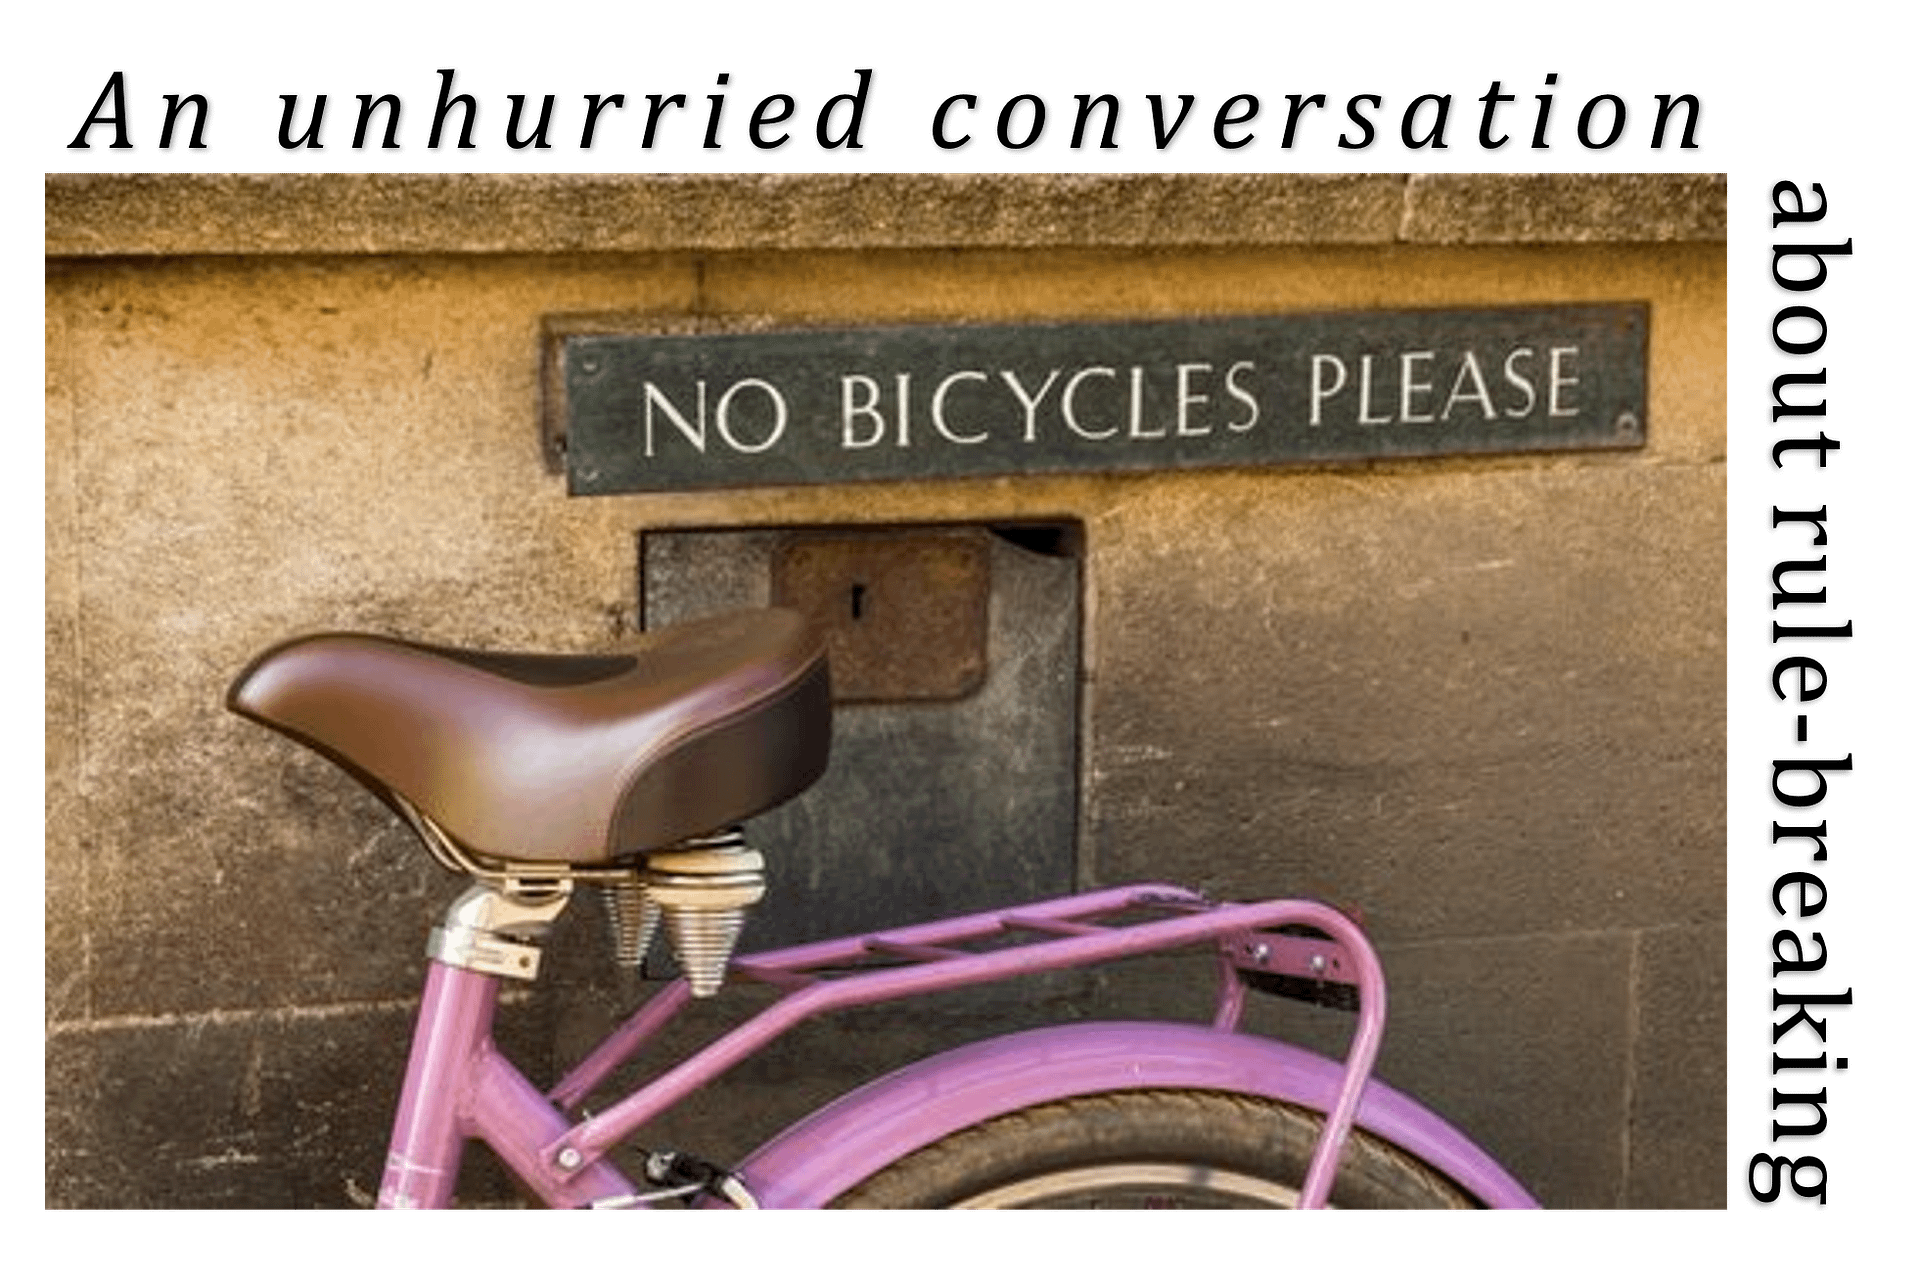 Photograph of pink bicycle under sign that says 'no bicycles please' with heading text 'An unhurried conversation about rule-breaking'